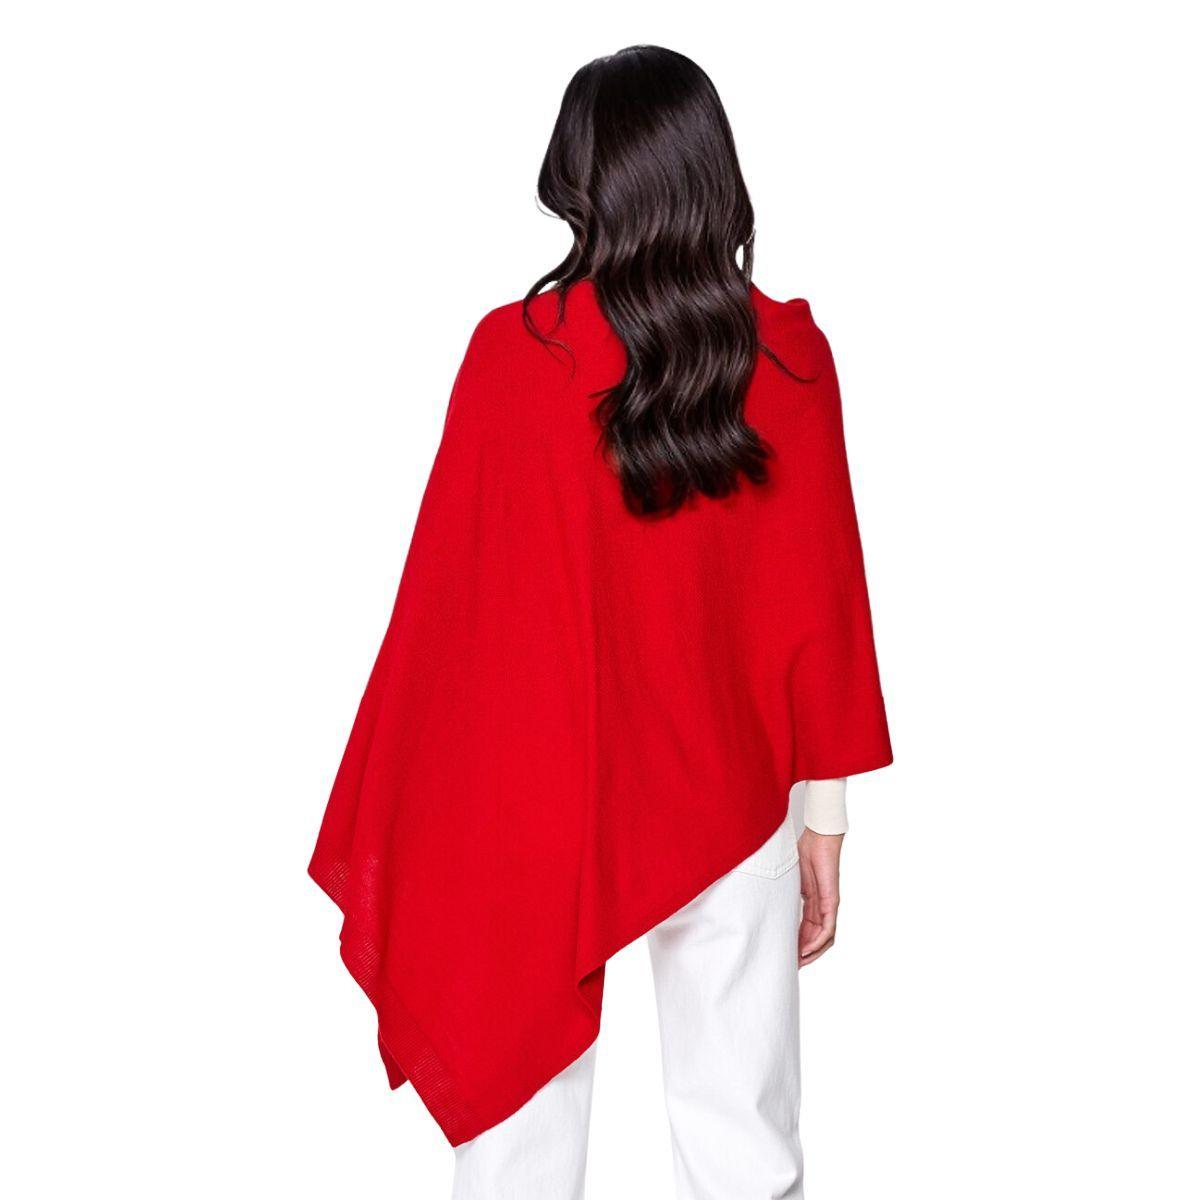 Upgrade your wardrobe with our Chic Red Scarf Poncho Wrap